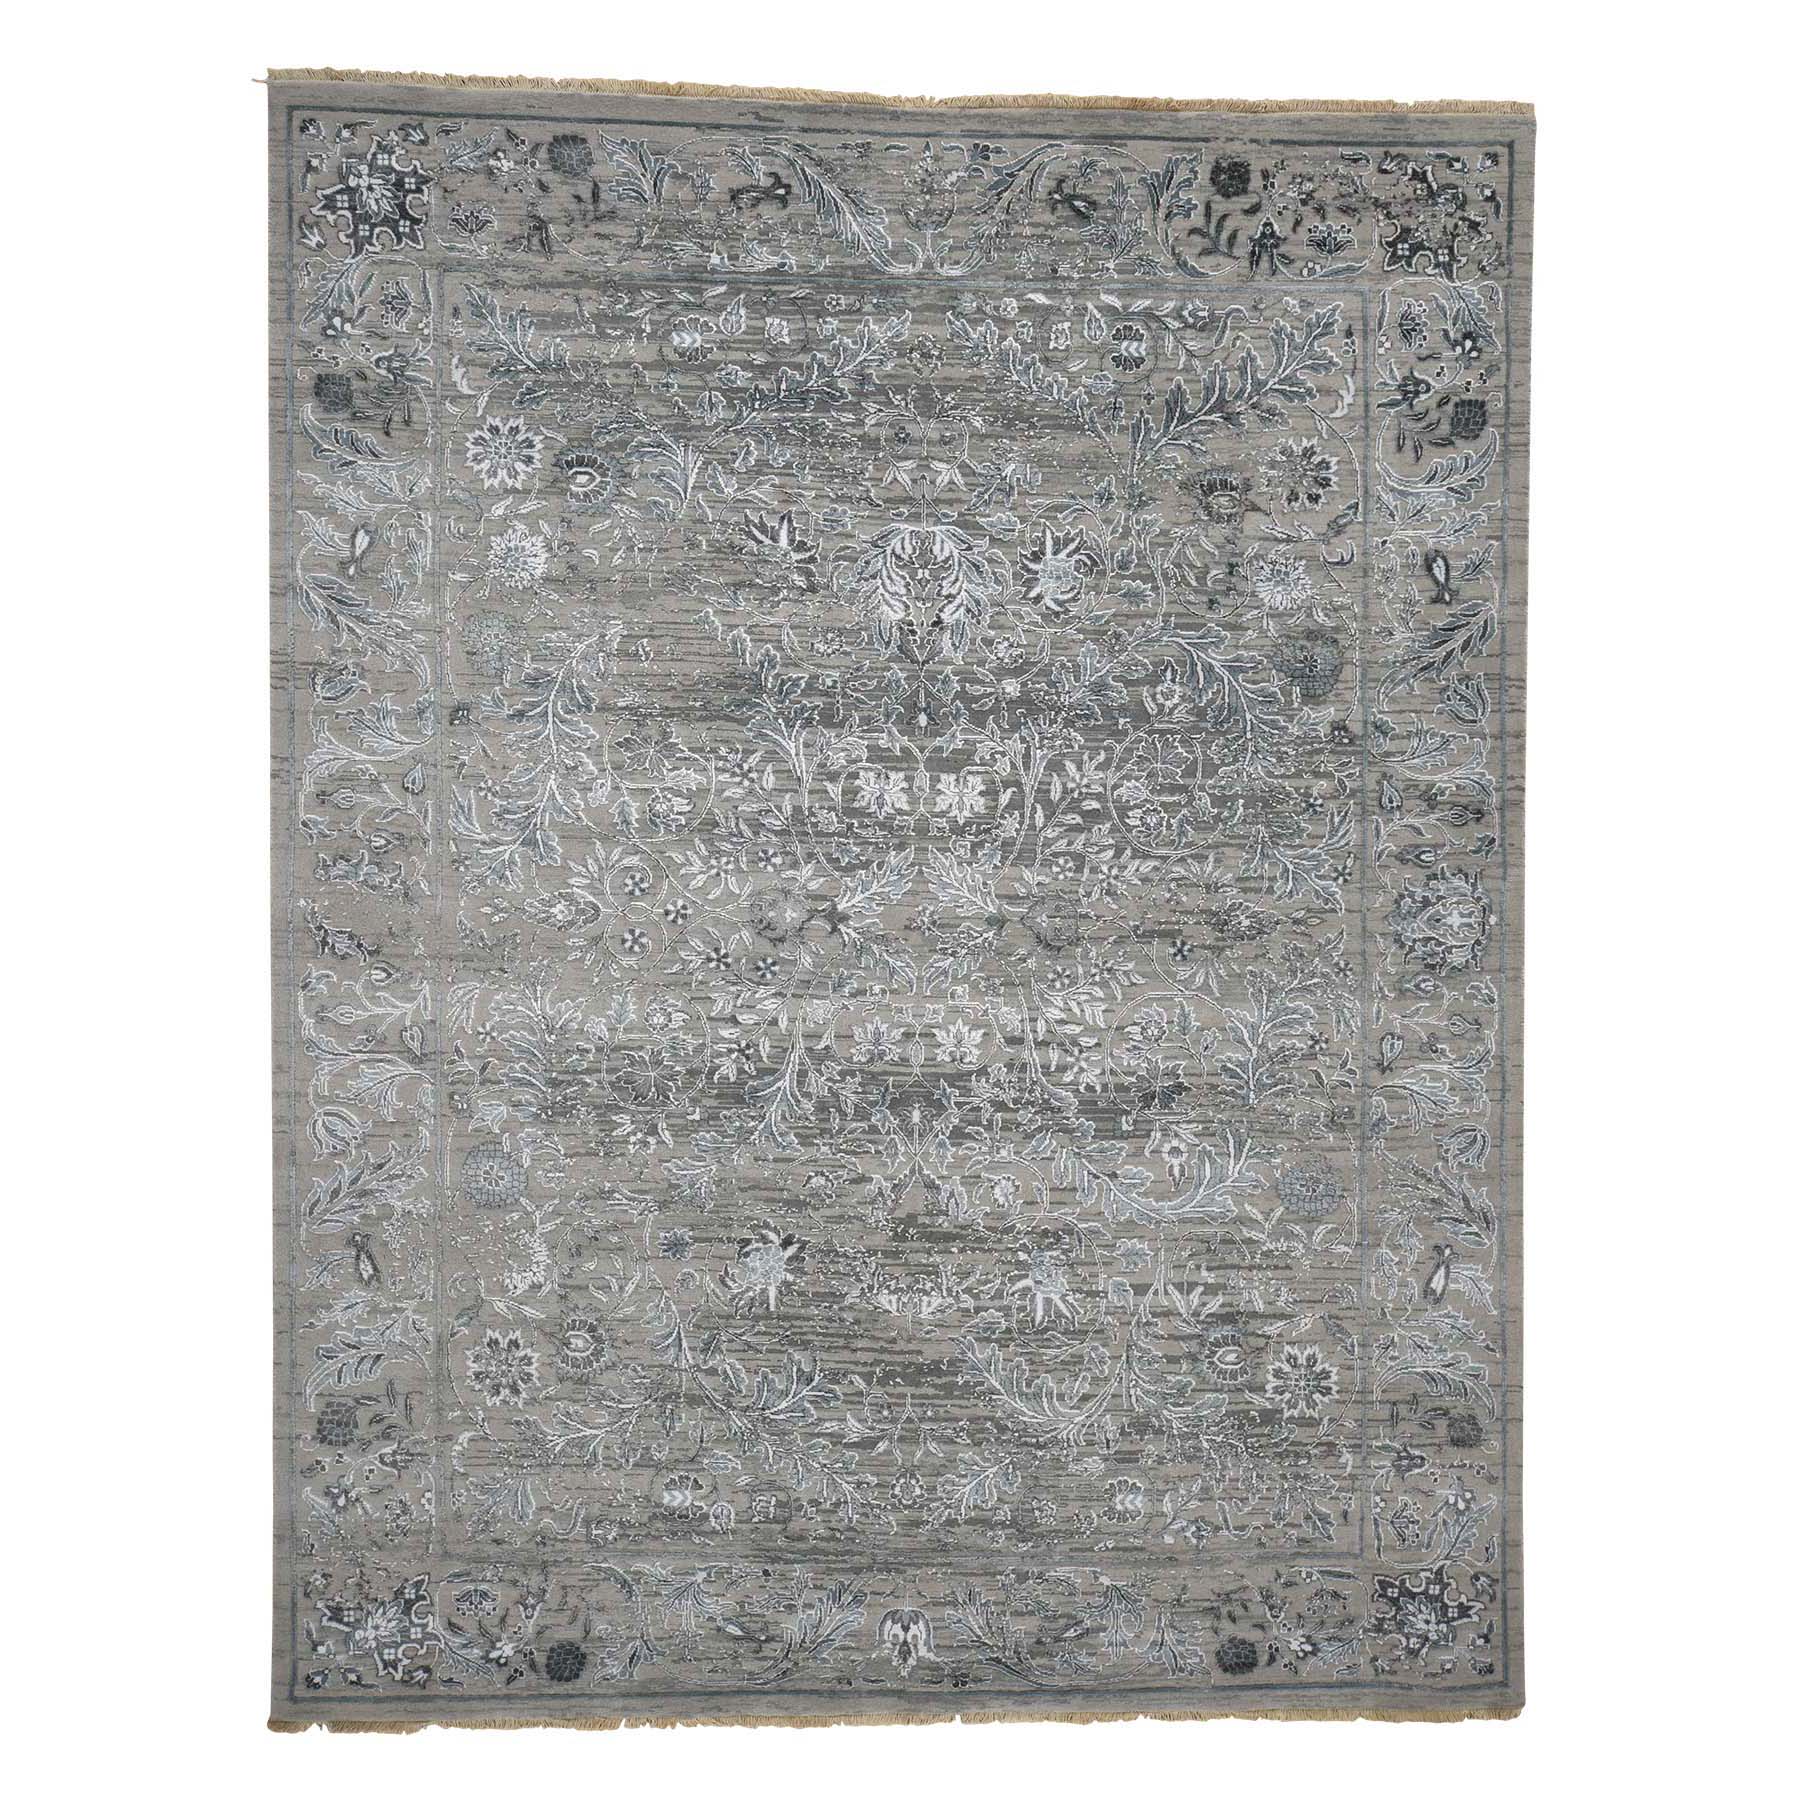 7-9 x10- Grey Traditional Kashan Design with Wool and Silk Hand Knotted Rug 